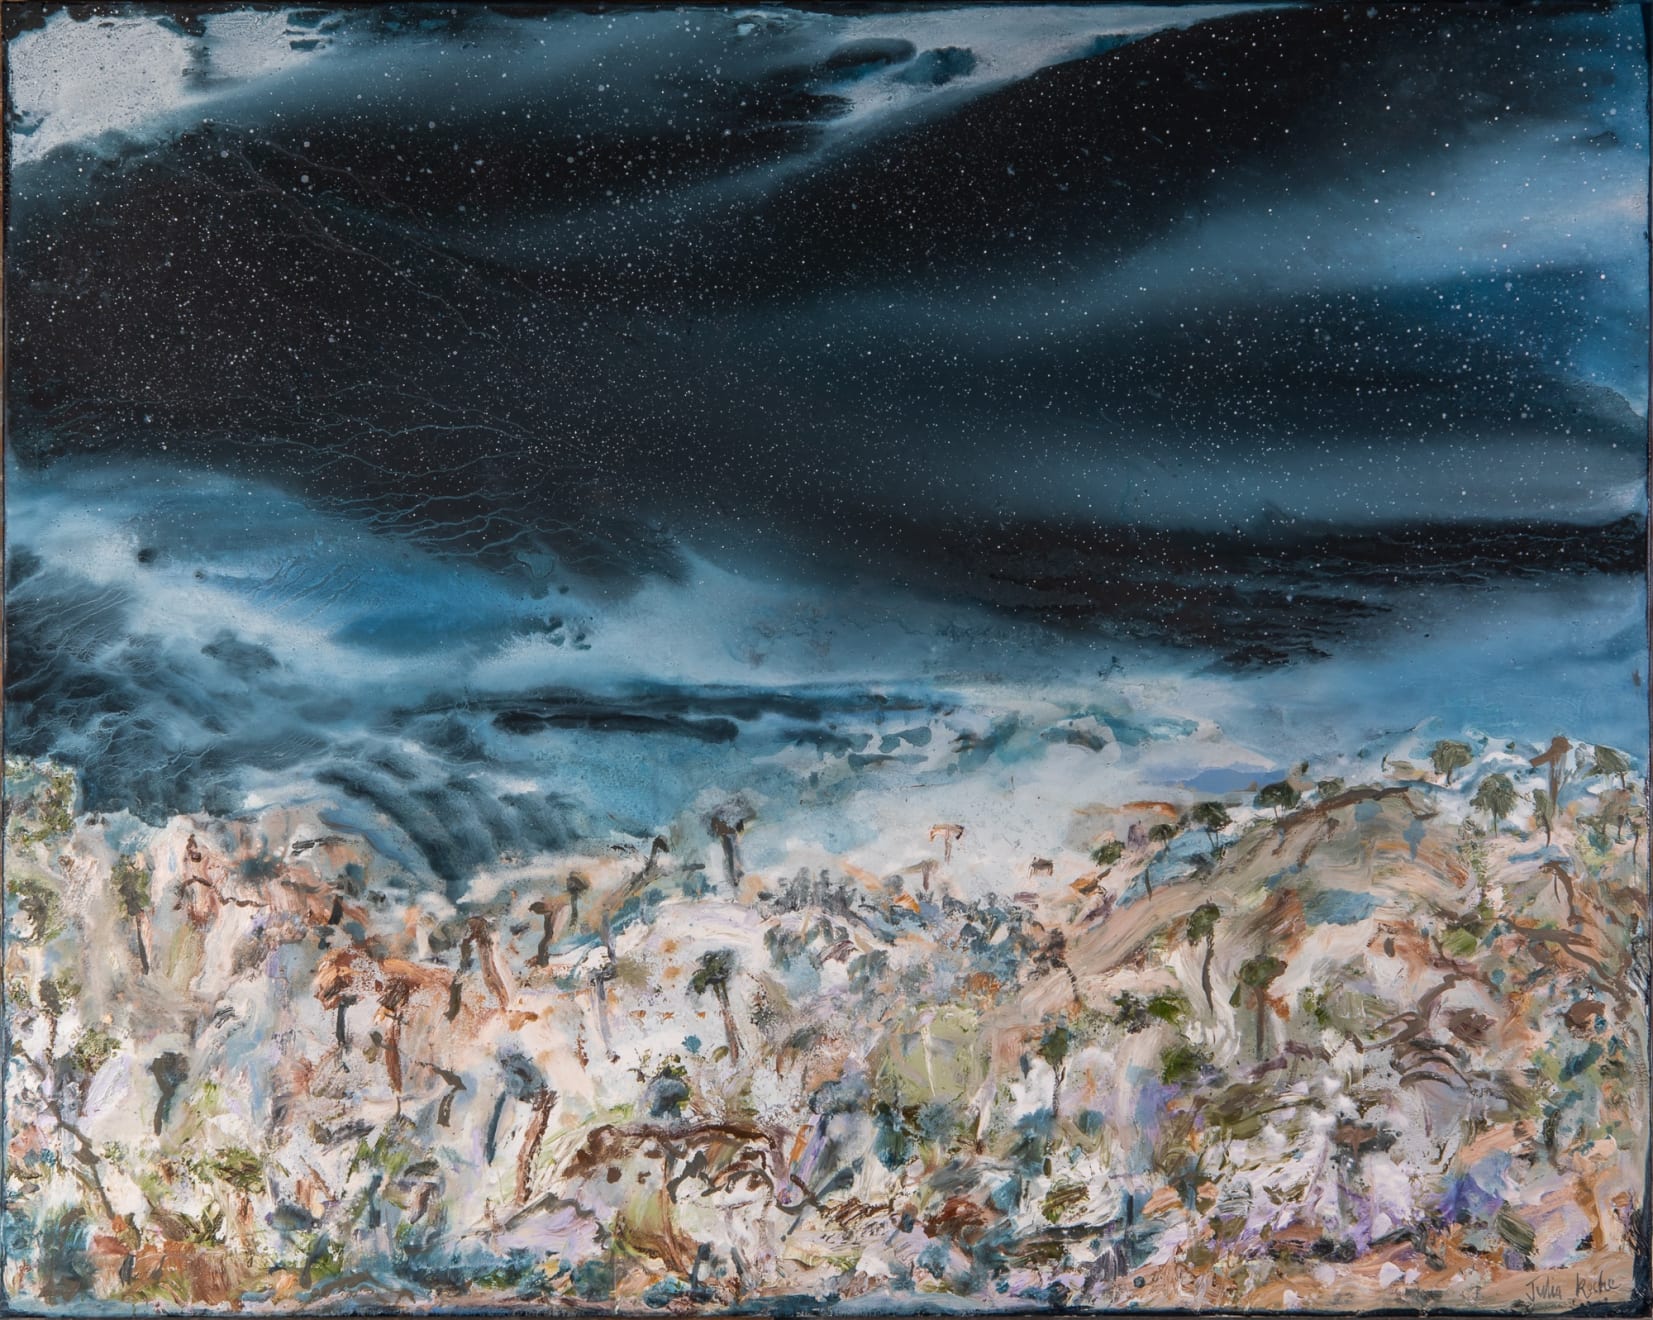 Stars Run Rampant Oil and Mixed Media on Canvas Stretched 153 x 122 cm AUD $4950 GBP £2465 USD $3305 SOLD